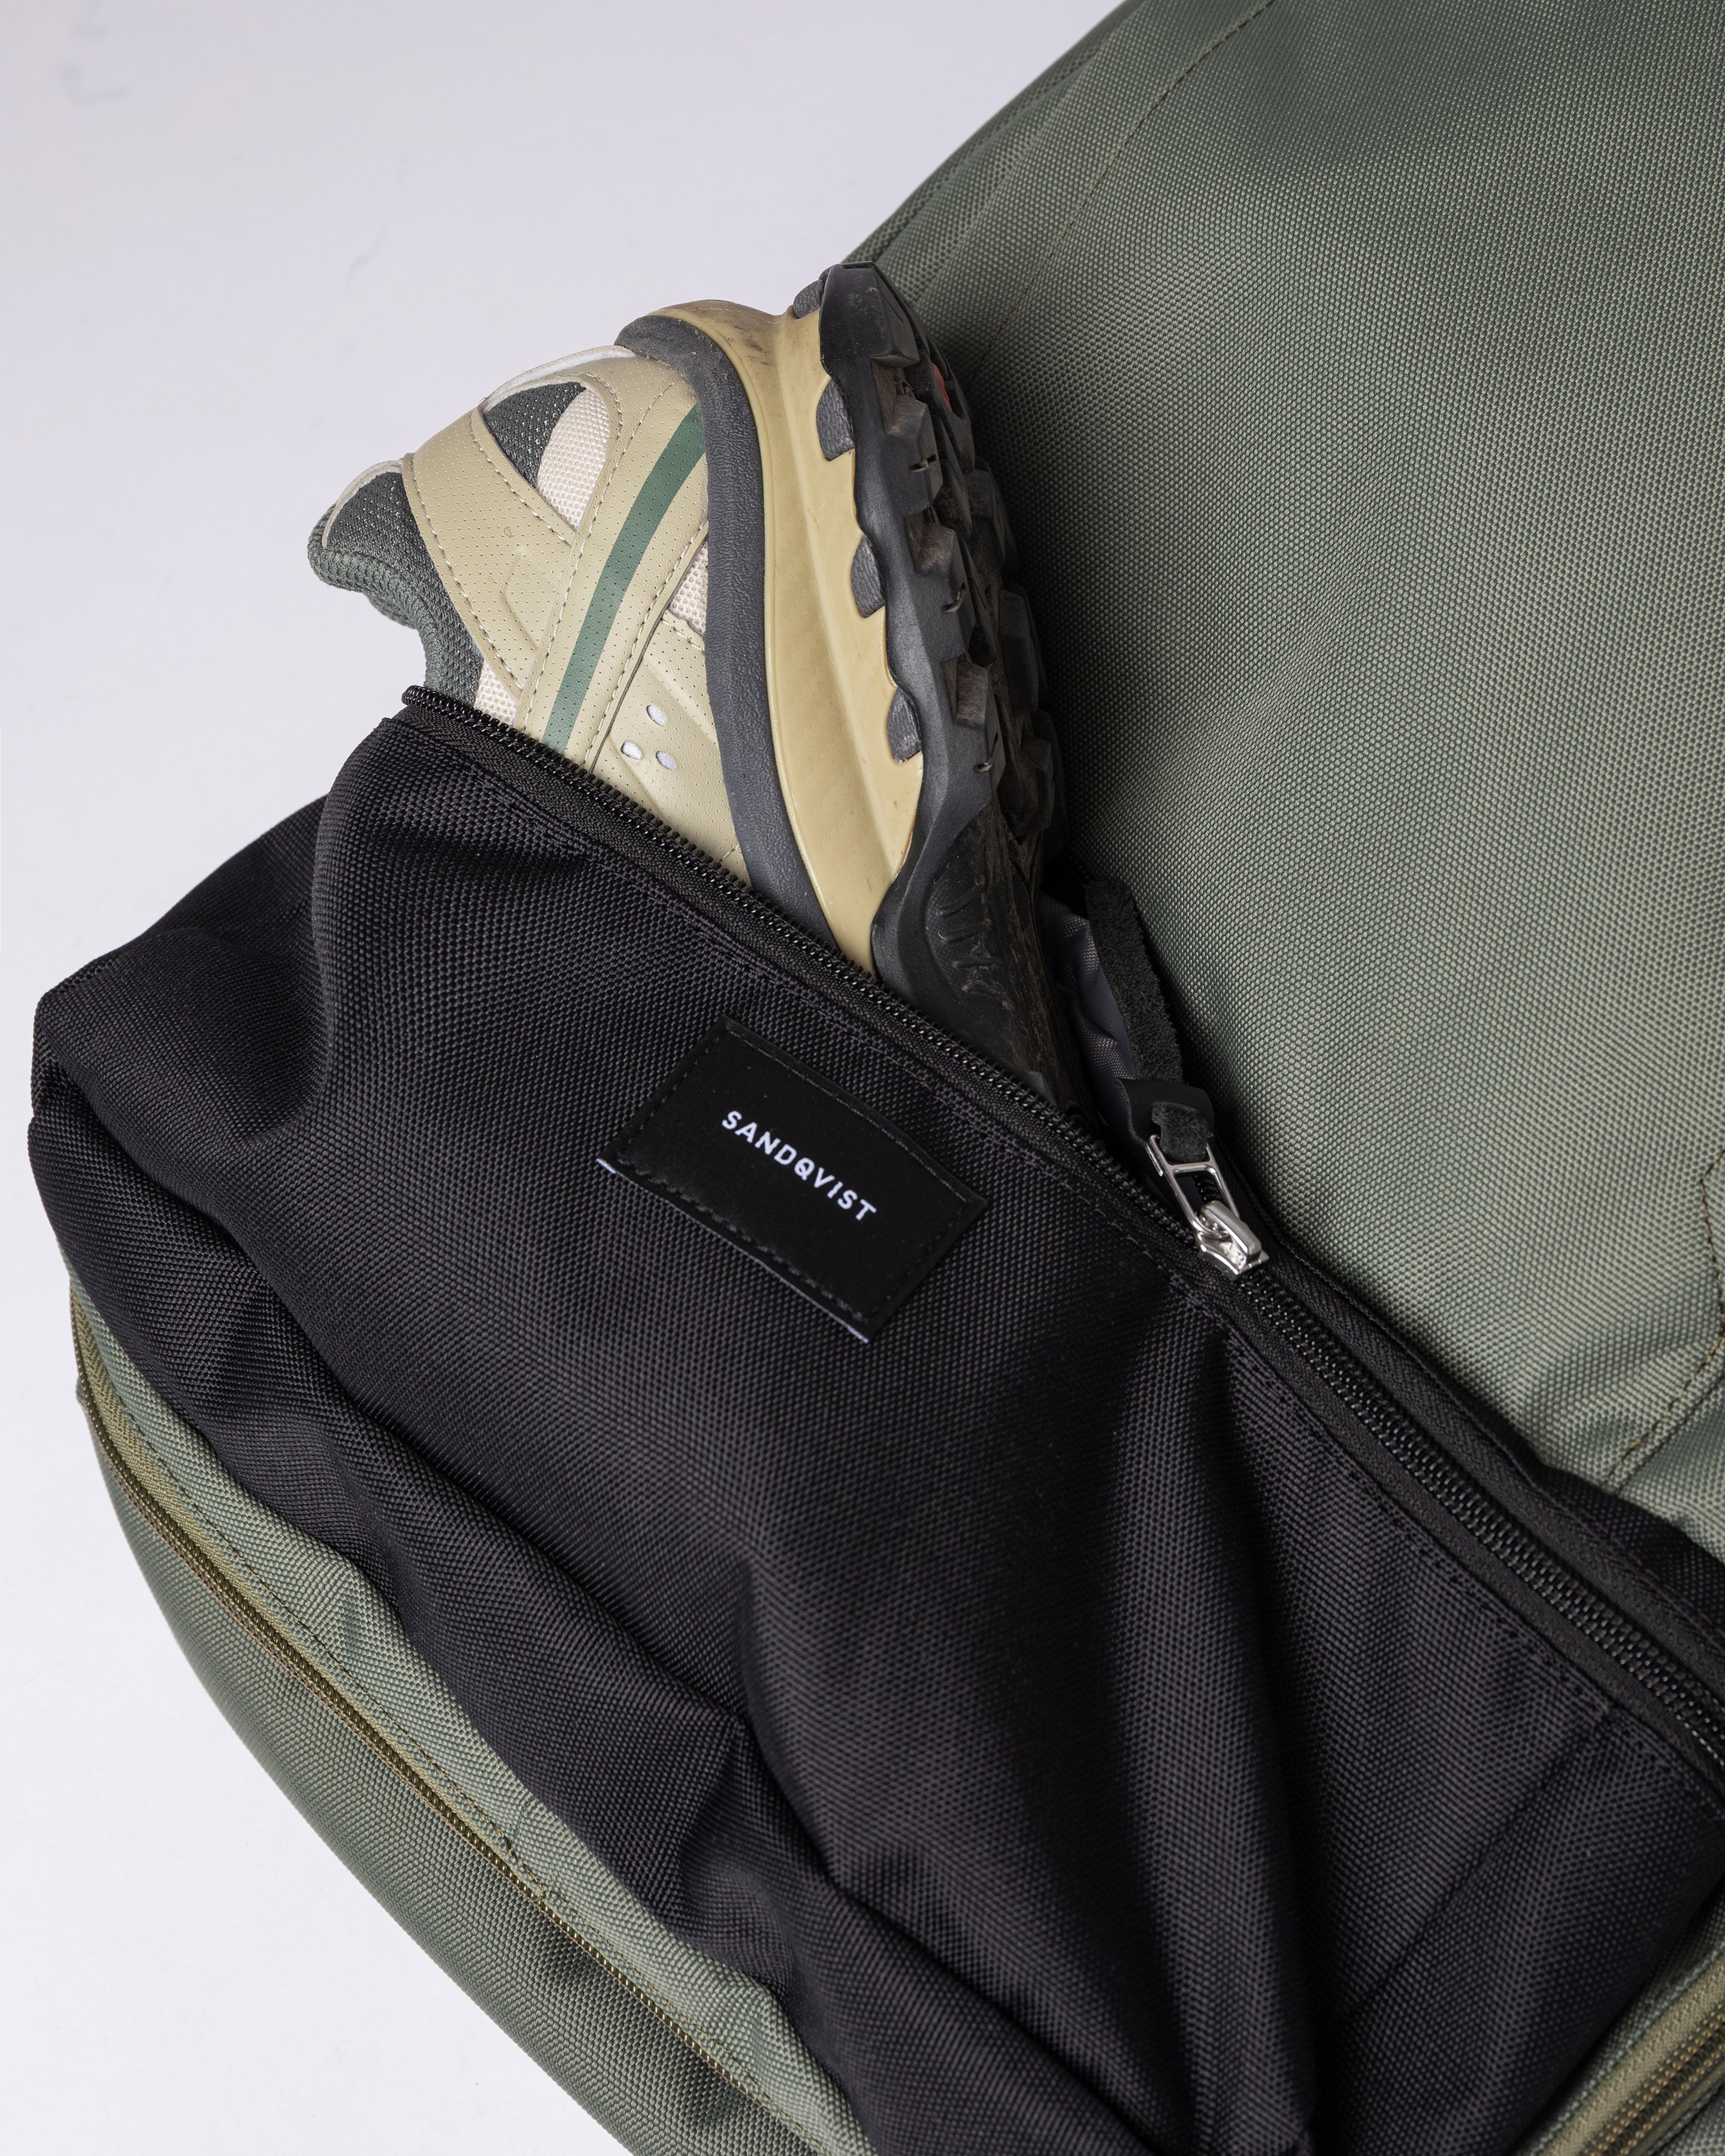 Sandqvist Otis Backpack in Green SQA2182 | Shop from eightywingold an official brand partner for Sandqvist Canada and US.